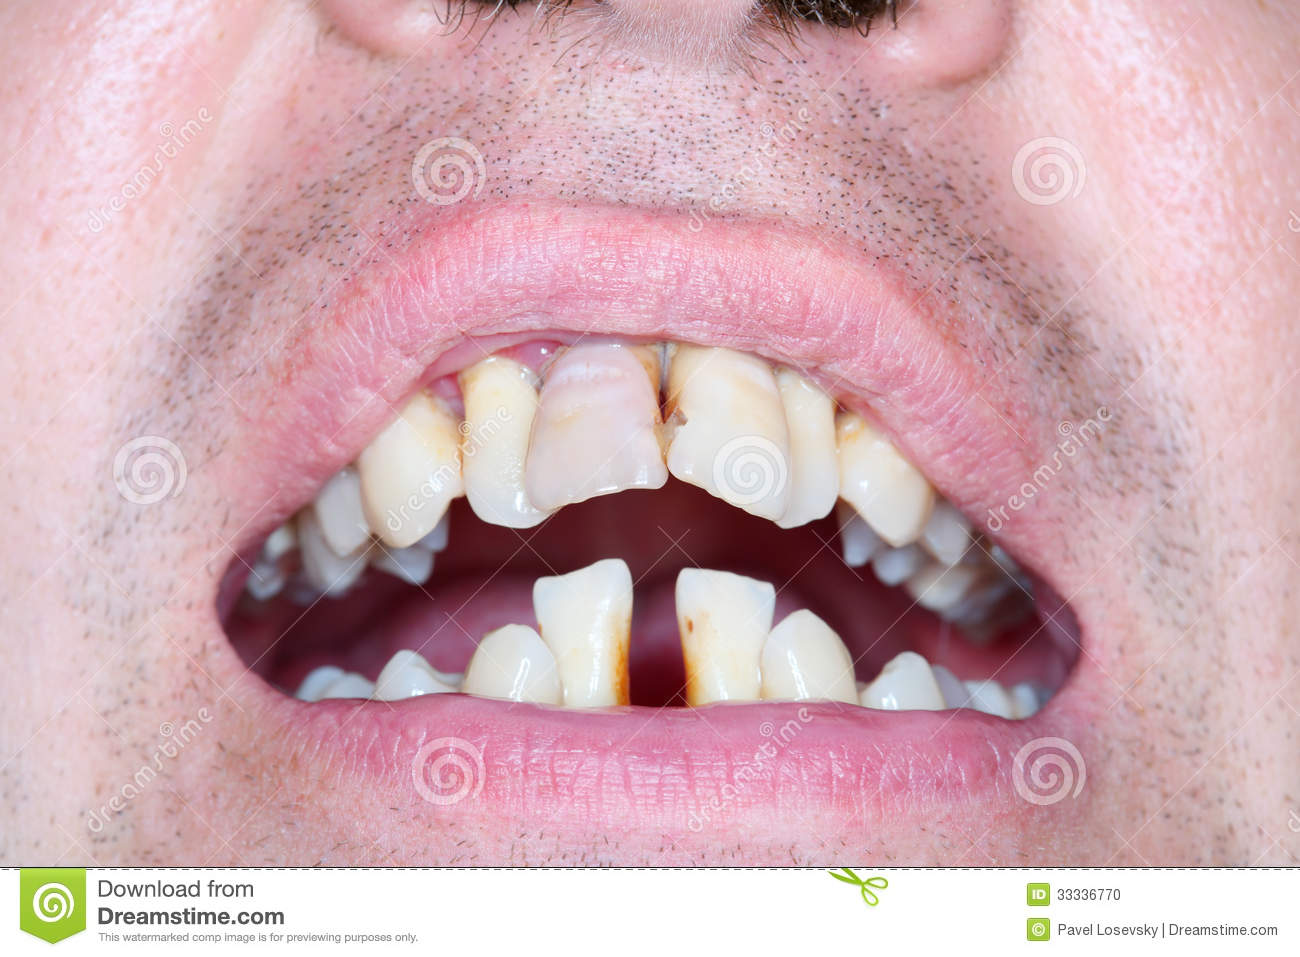 Rotten And Crooked Teeth Of Men  Crooked Teeth Can Be Sign Of Running